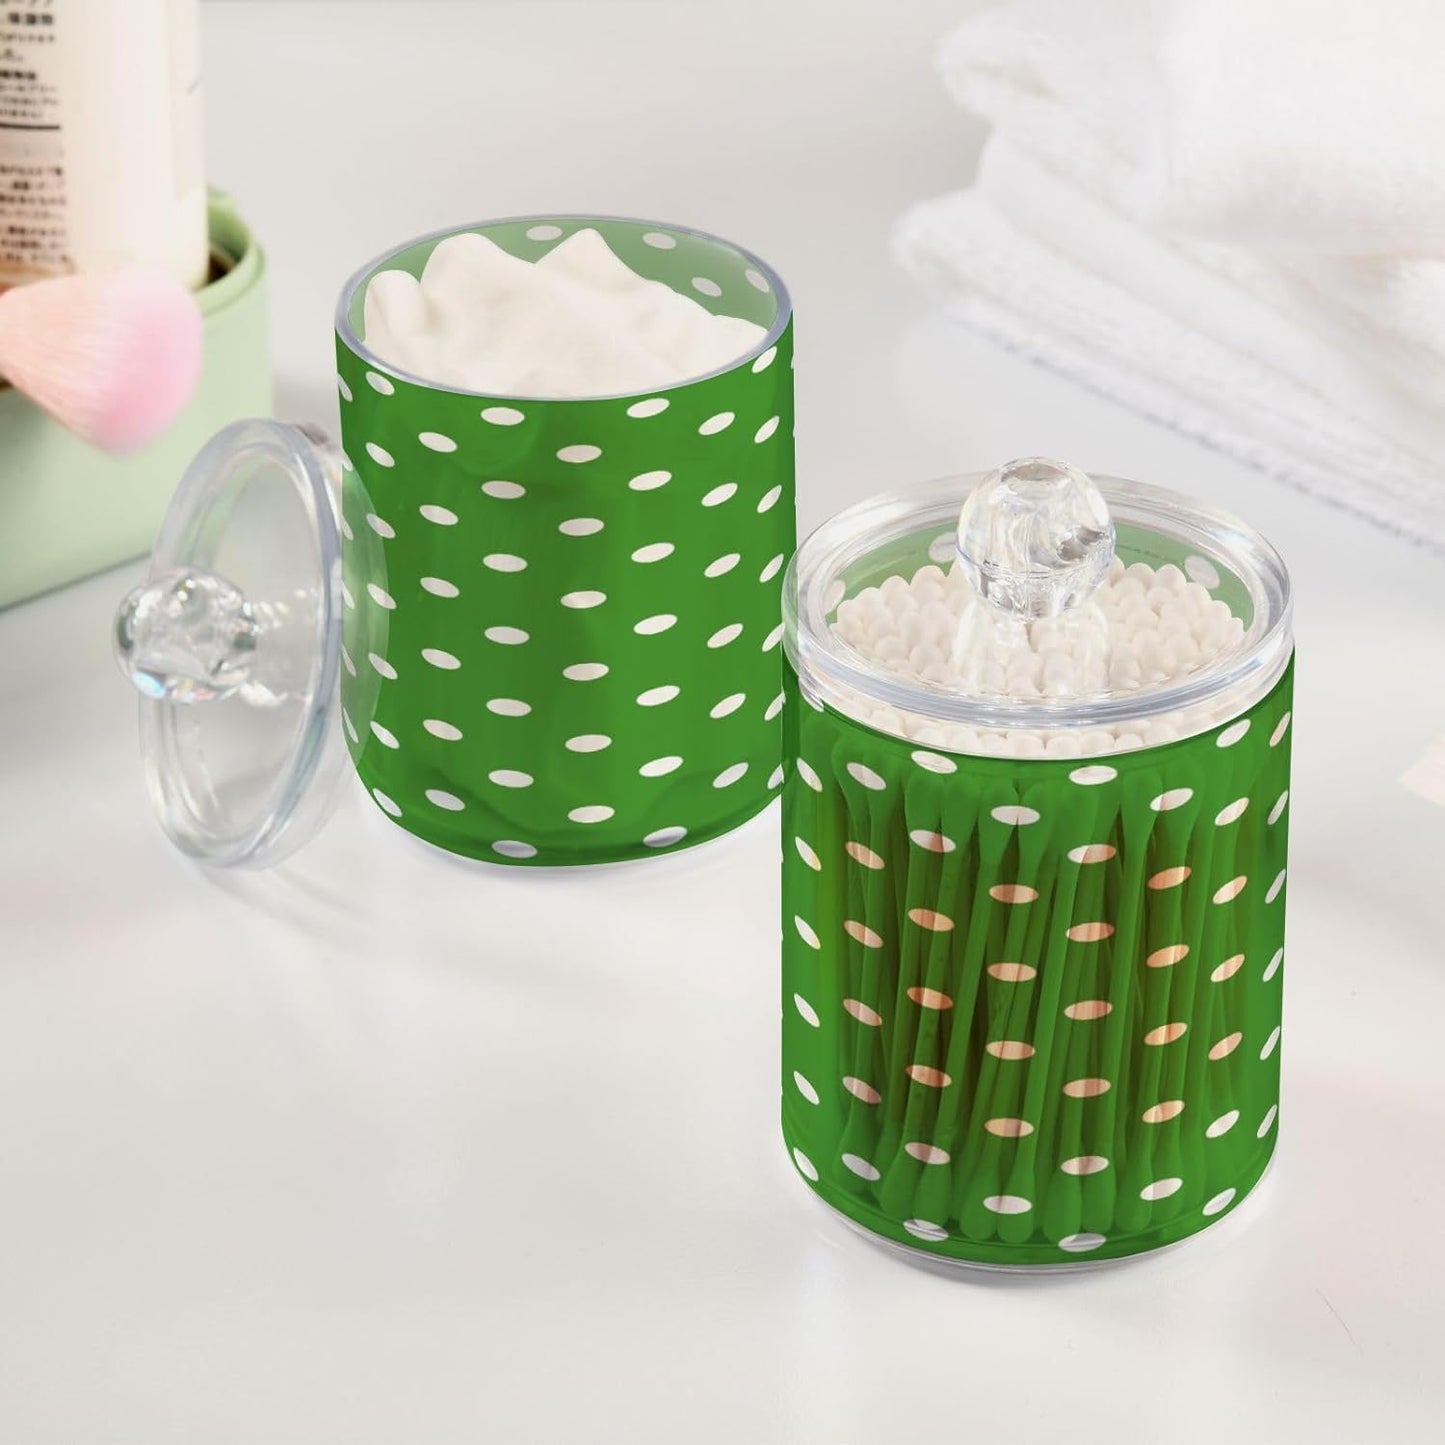 FLildon Green Polka Dot Qtip Holder Dispenser, Bathroom Organizer and Storage Containers, 4Pack Clear Plastic Apothecary Jars with Lids for Cotton Ball, Cotton Swab, Floss